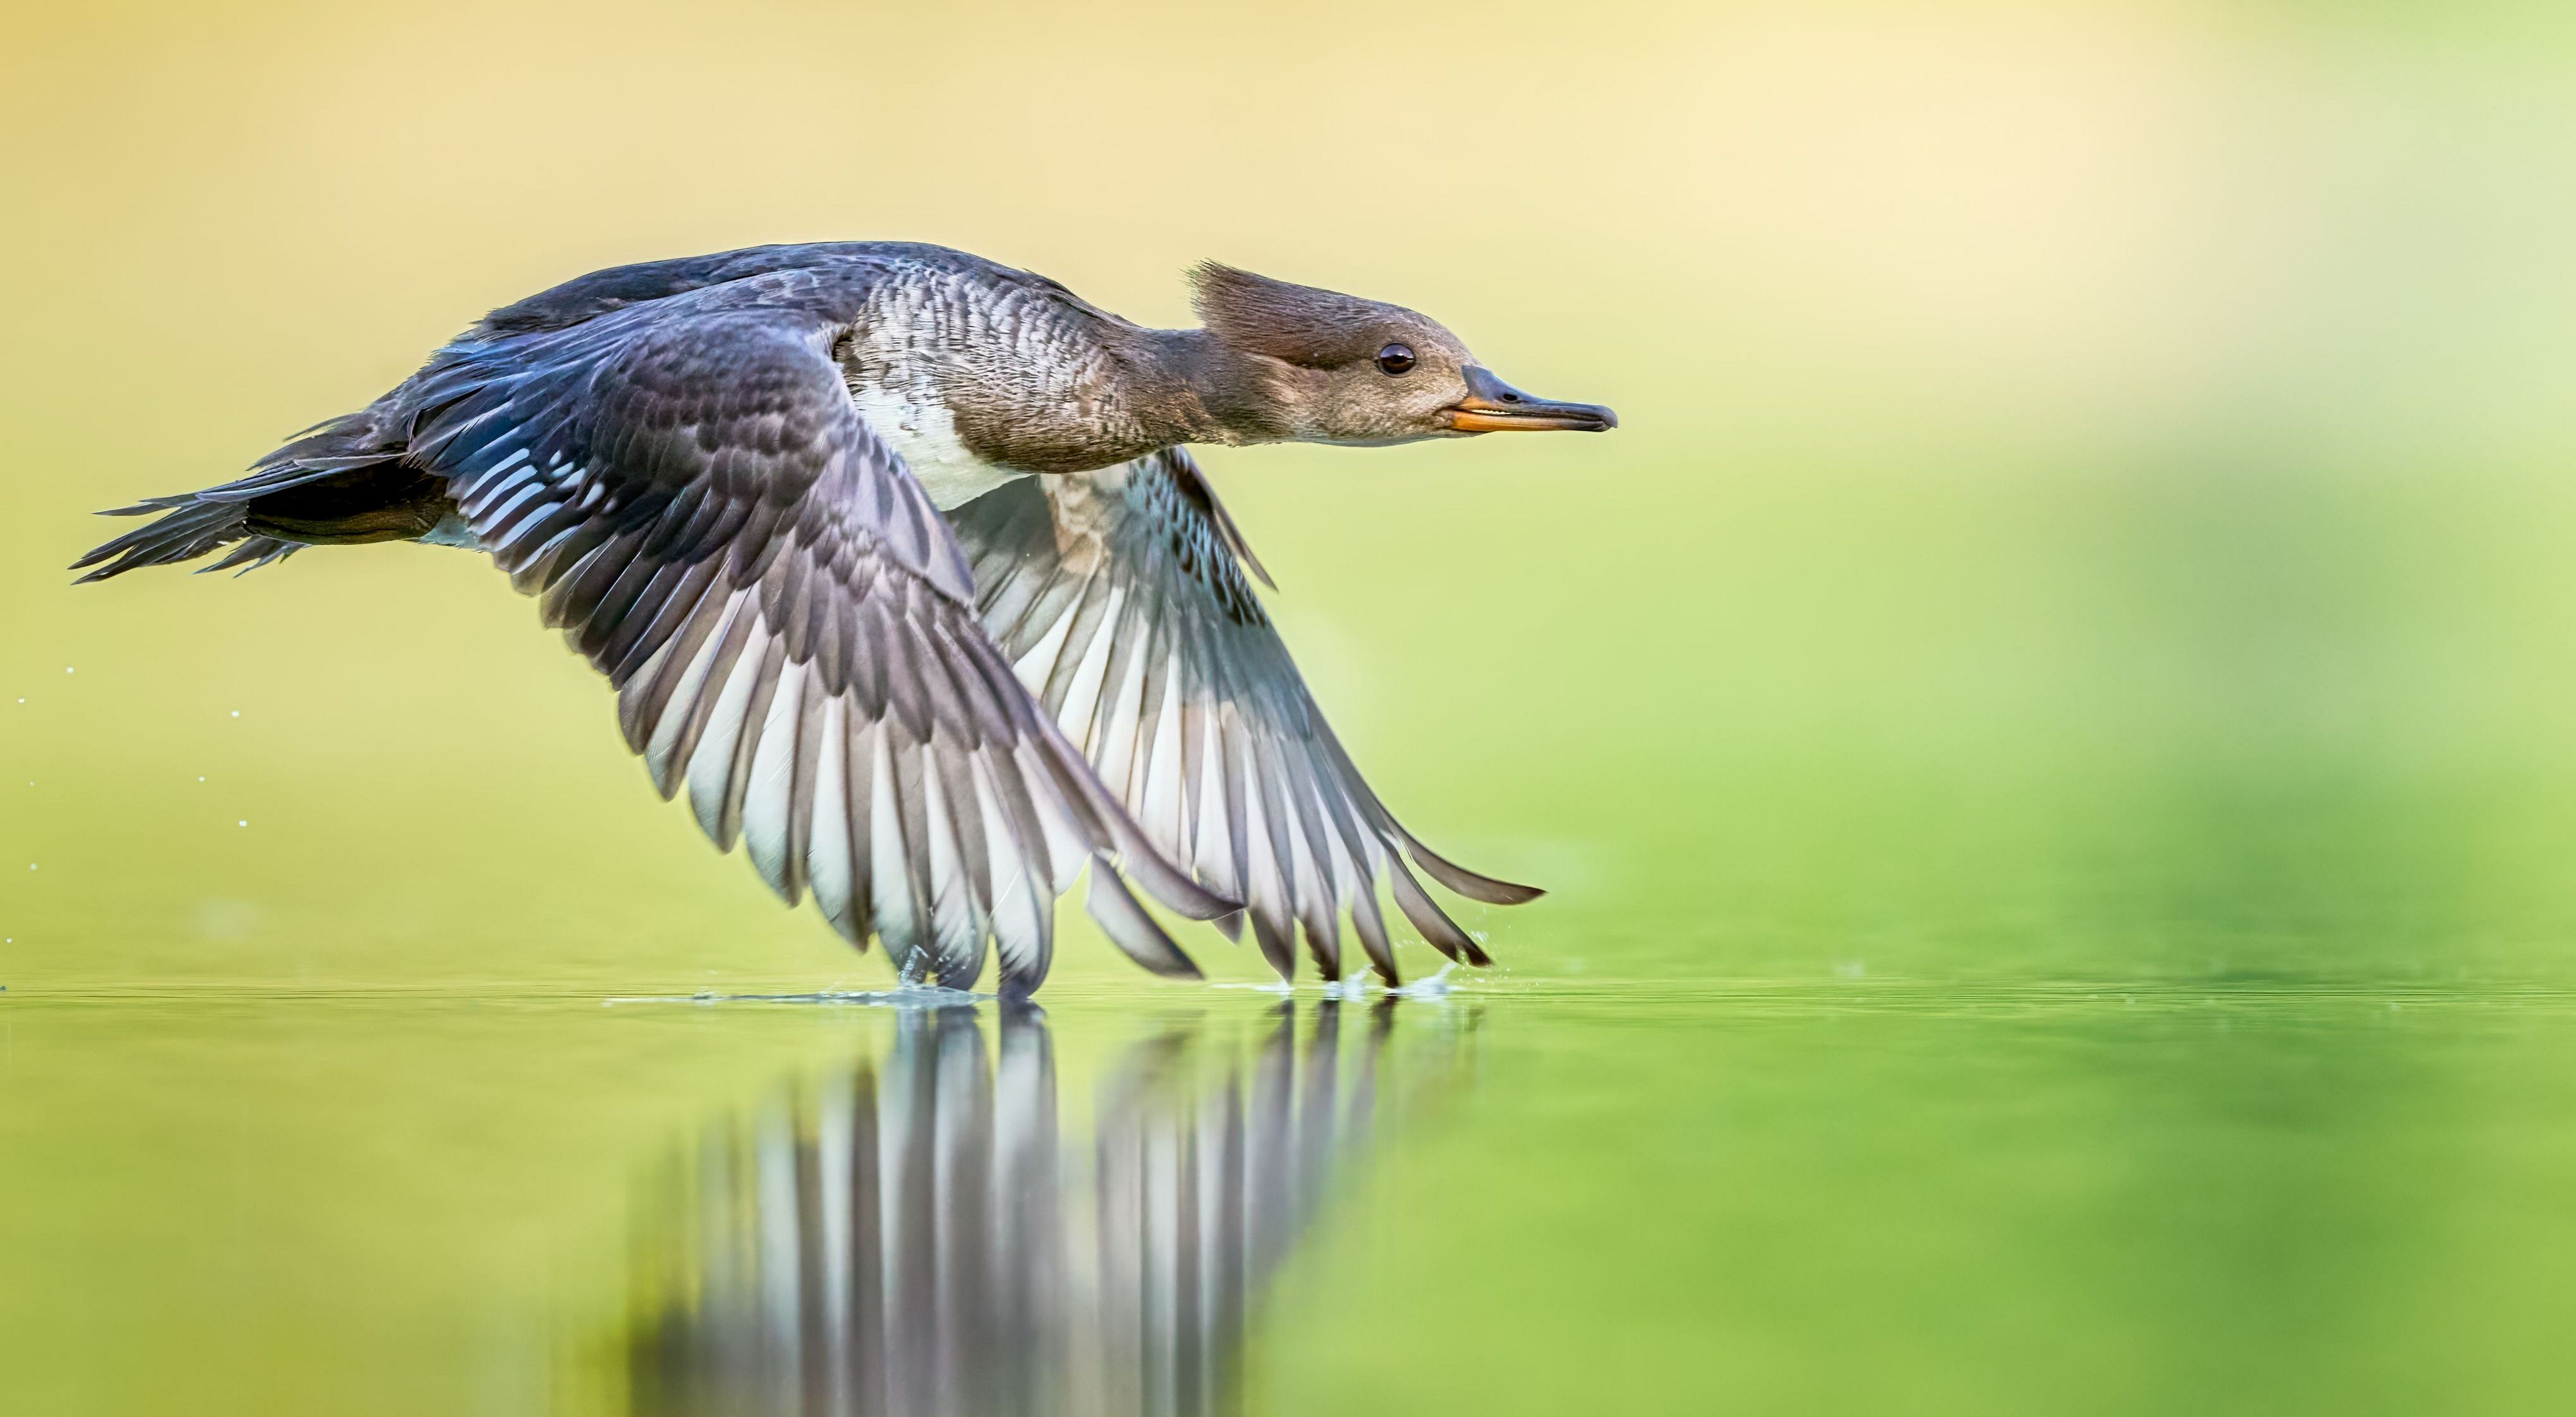 A female hooded merganser flies low over the water with her wingtips touching the surface of the water.